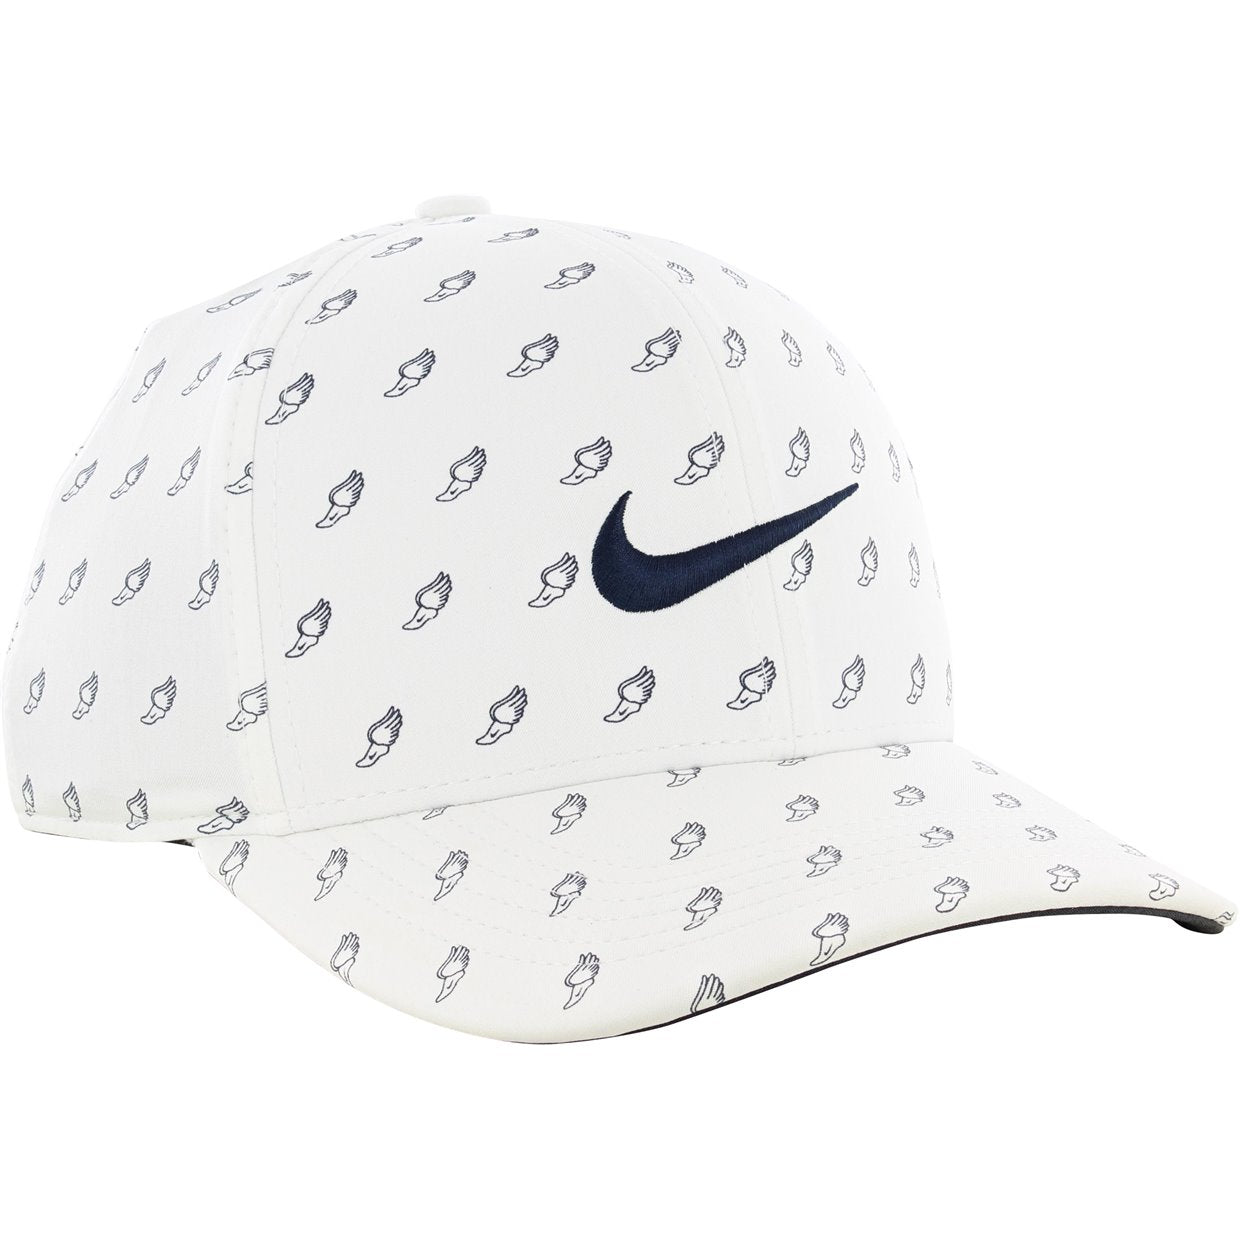 12 cool items worn at the U.S. Open 